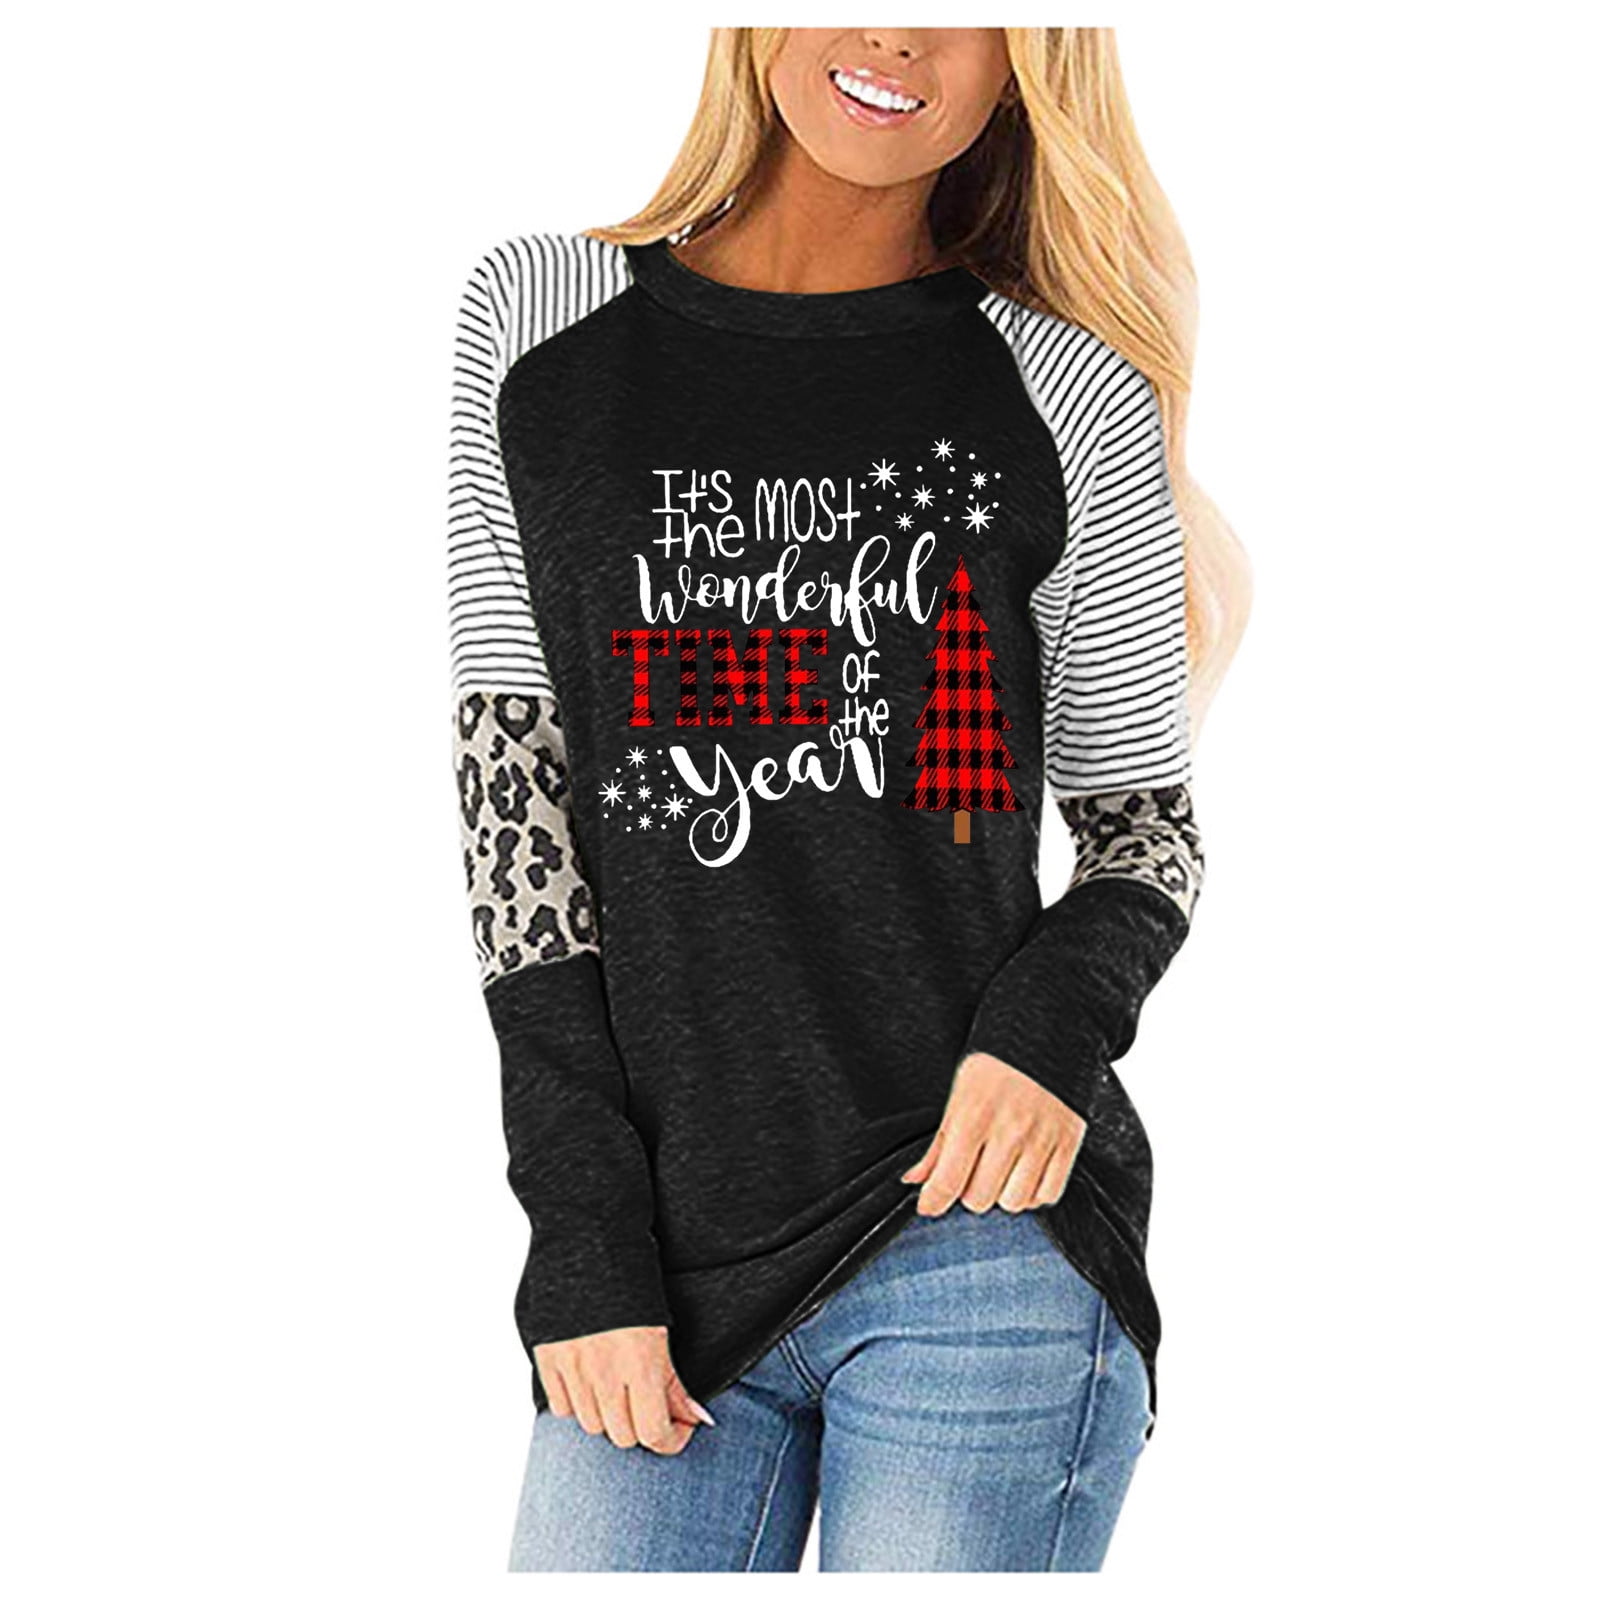 Merry Christmas Graphic T-Shirt Women Letter Printed Long 3/4 Sleeve Splicing Top 